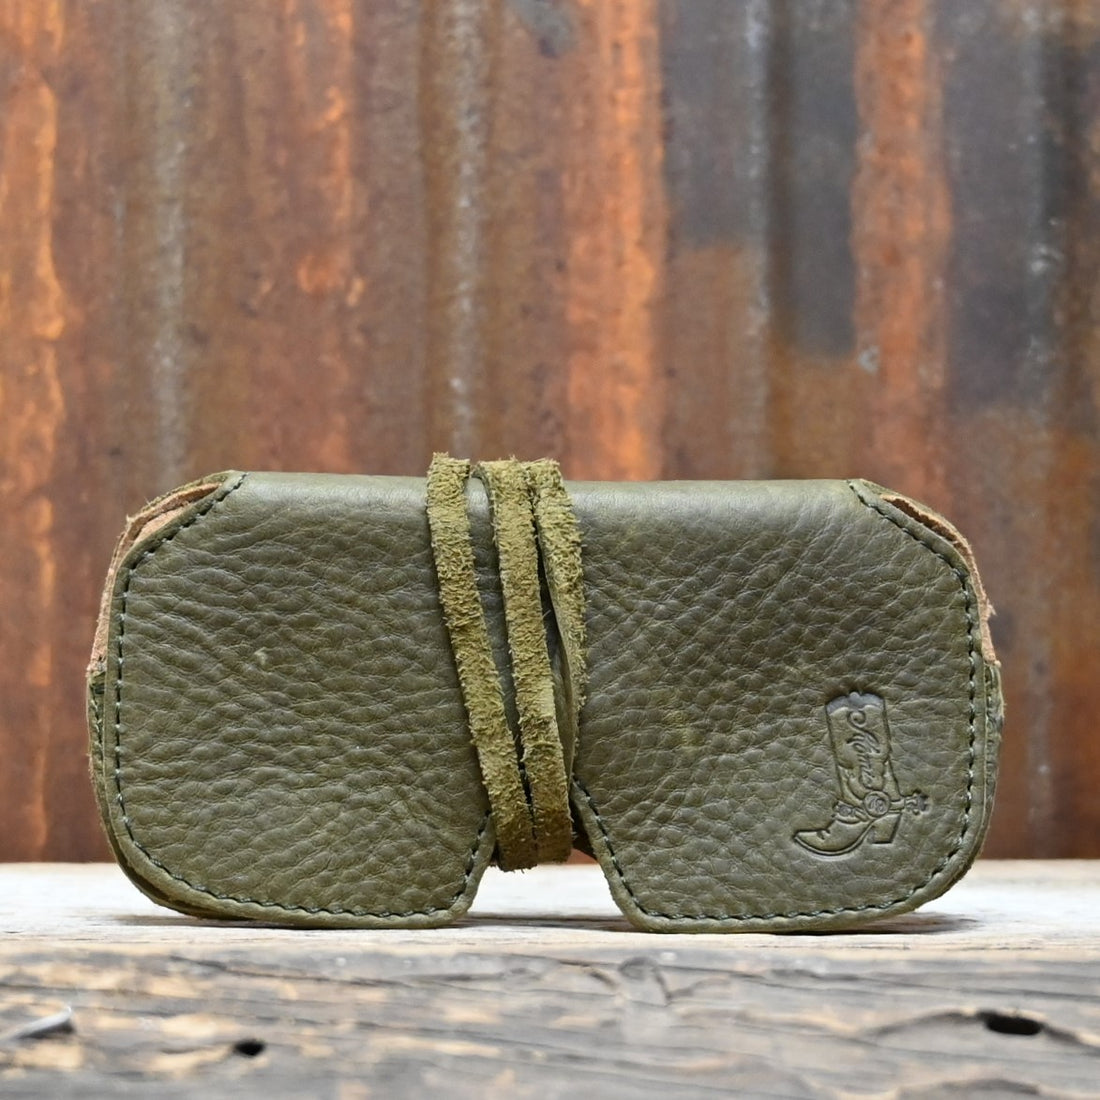 WP Standard Mr Peepers Sunglasses Case in Olive view of case